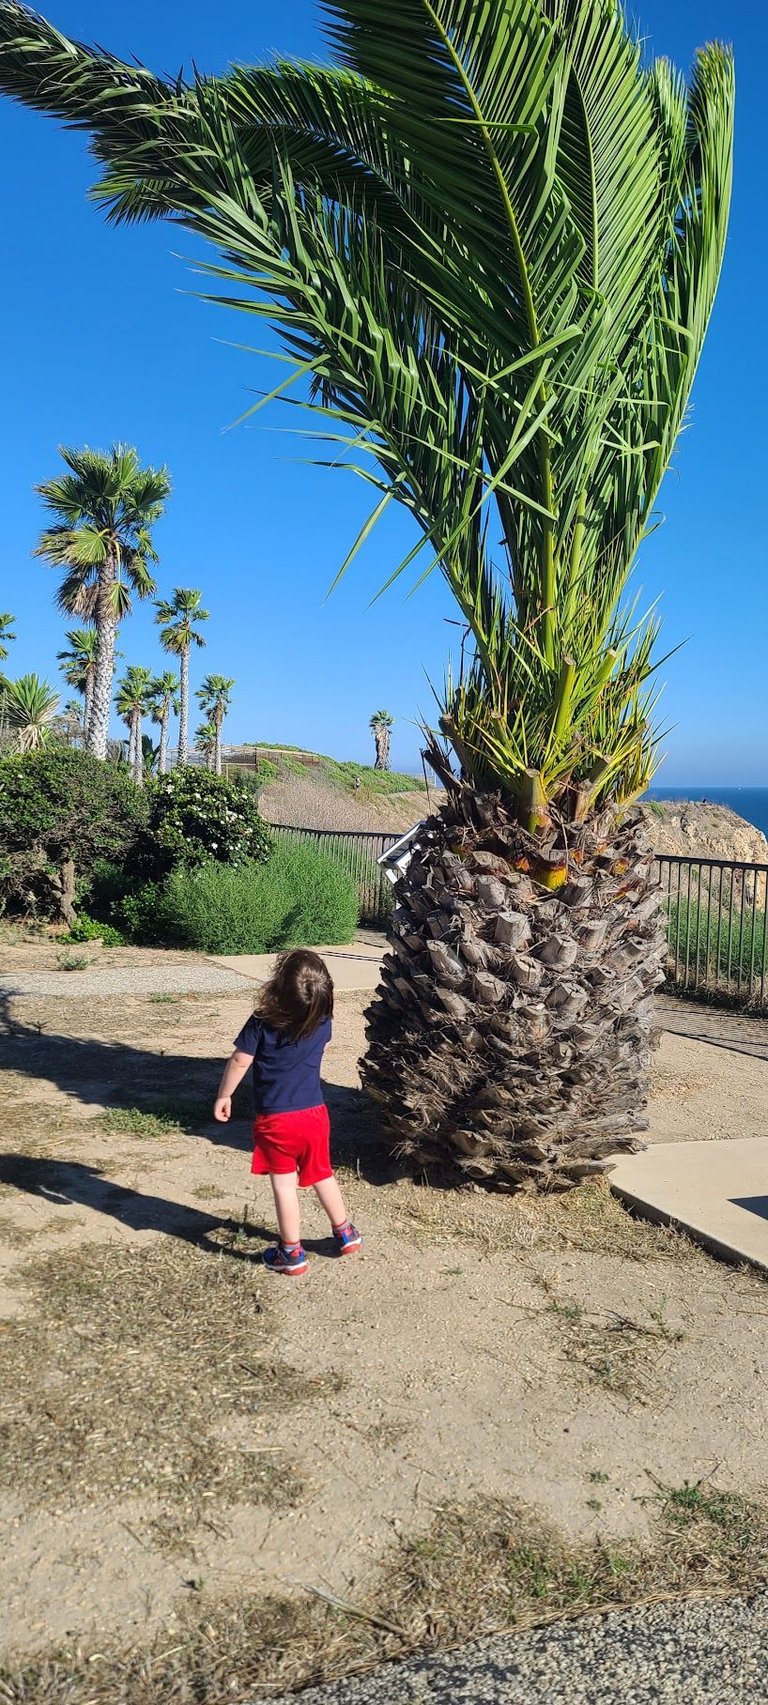 "Daddy look! A big pineapple!"